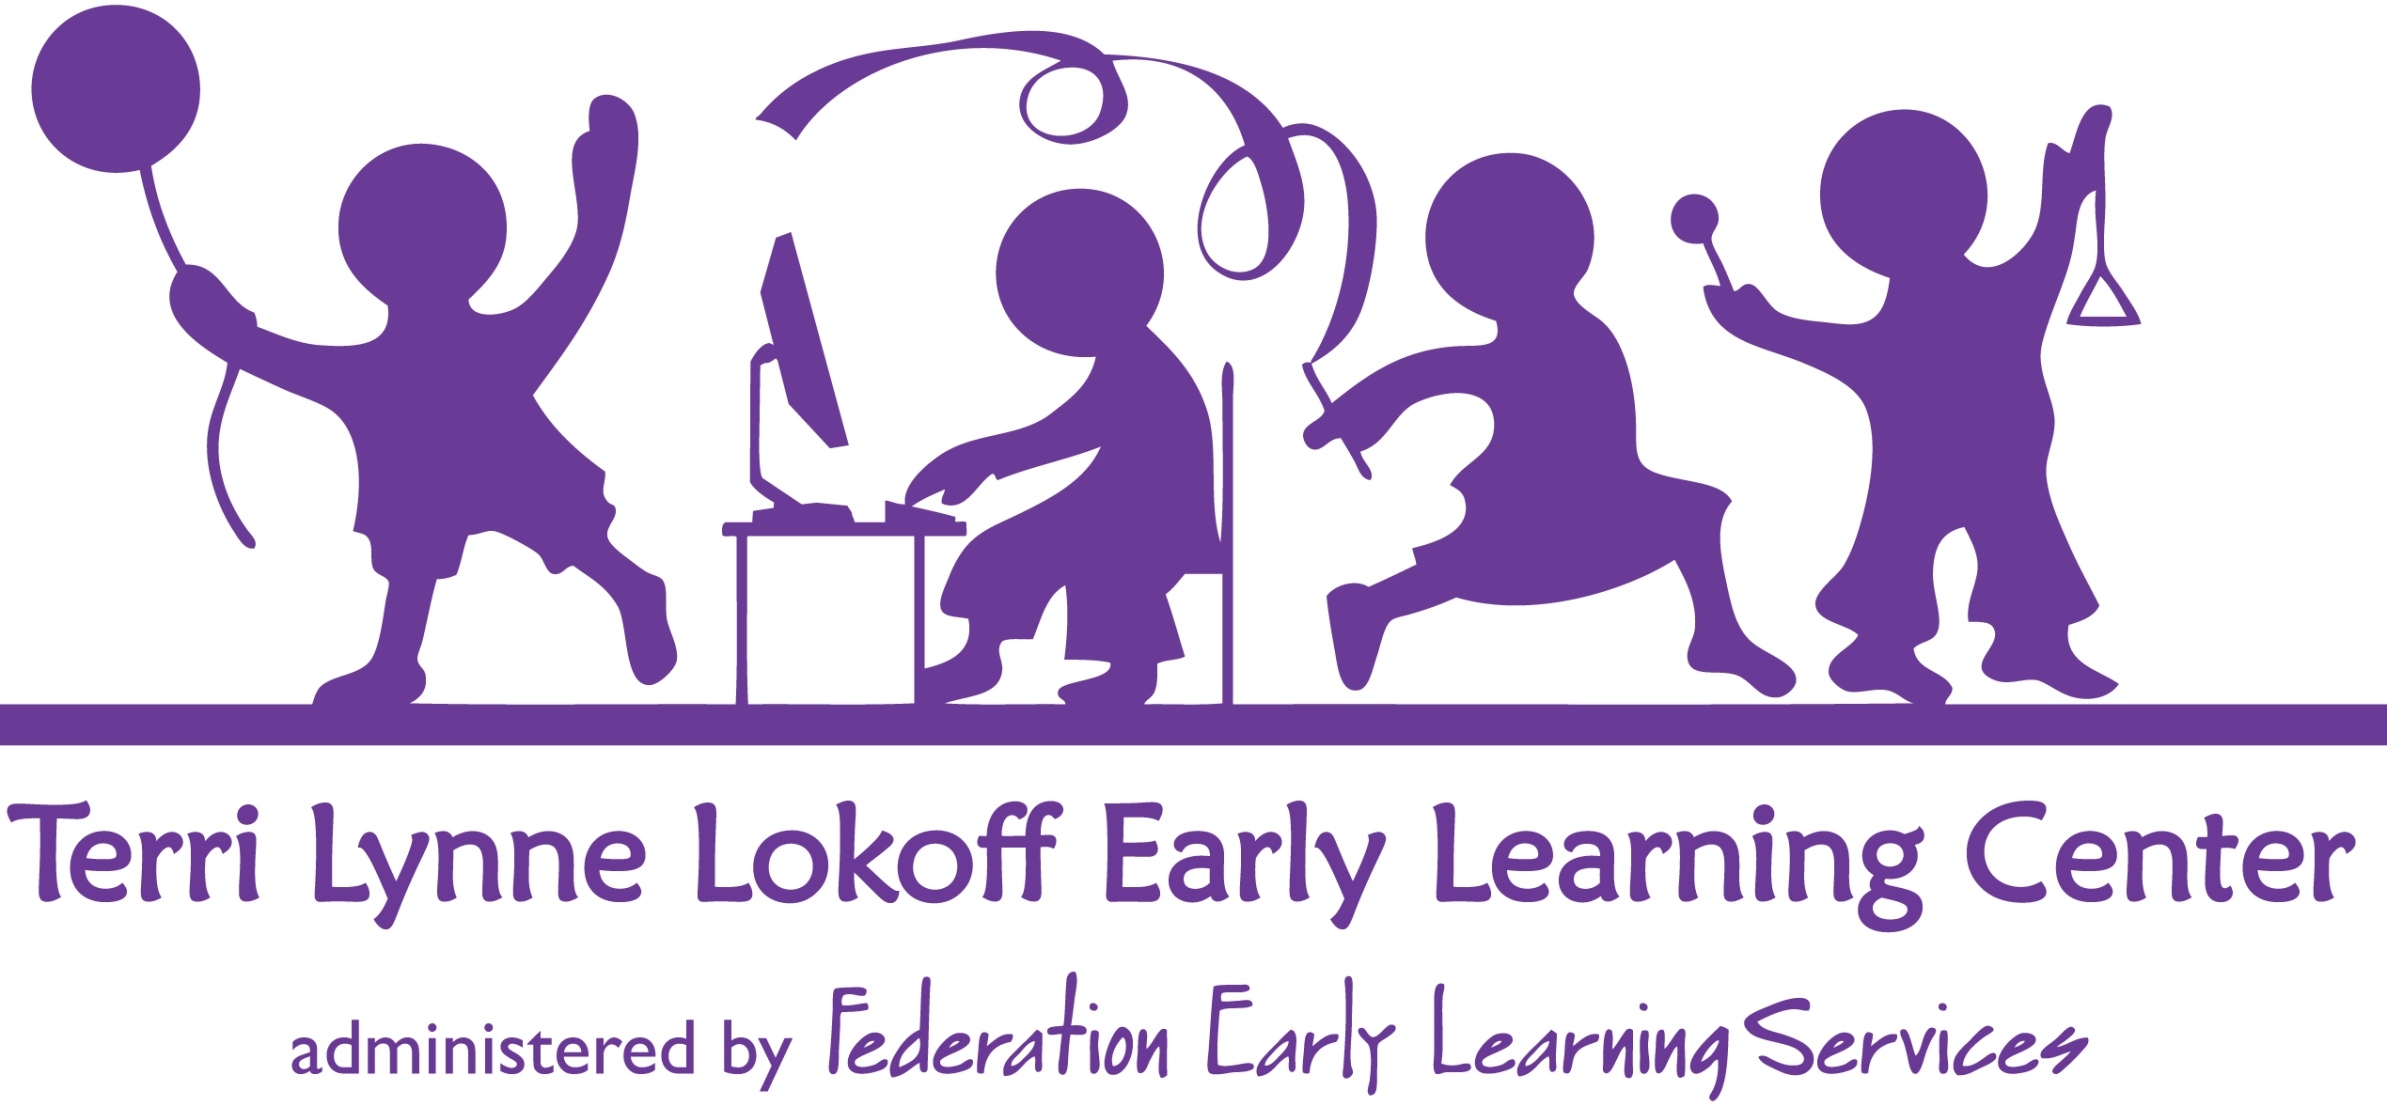 Lokoff Early Learning Center